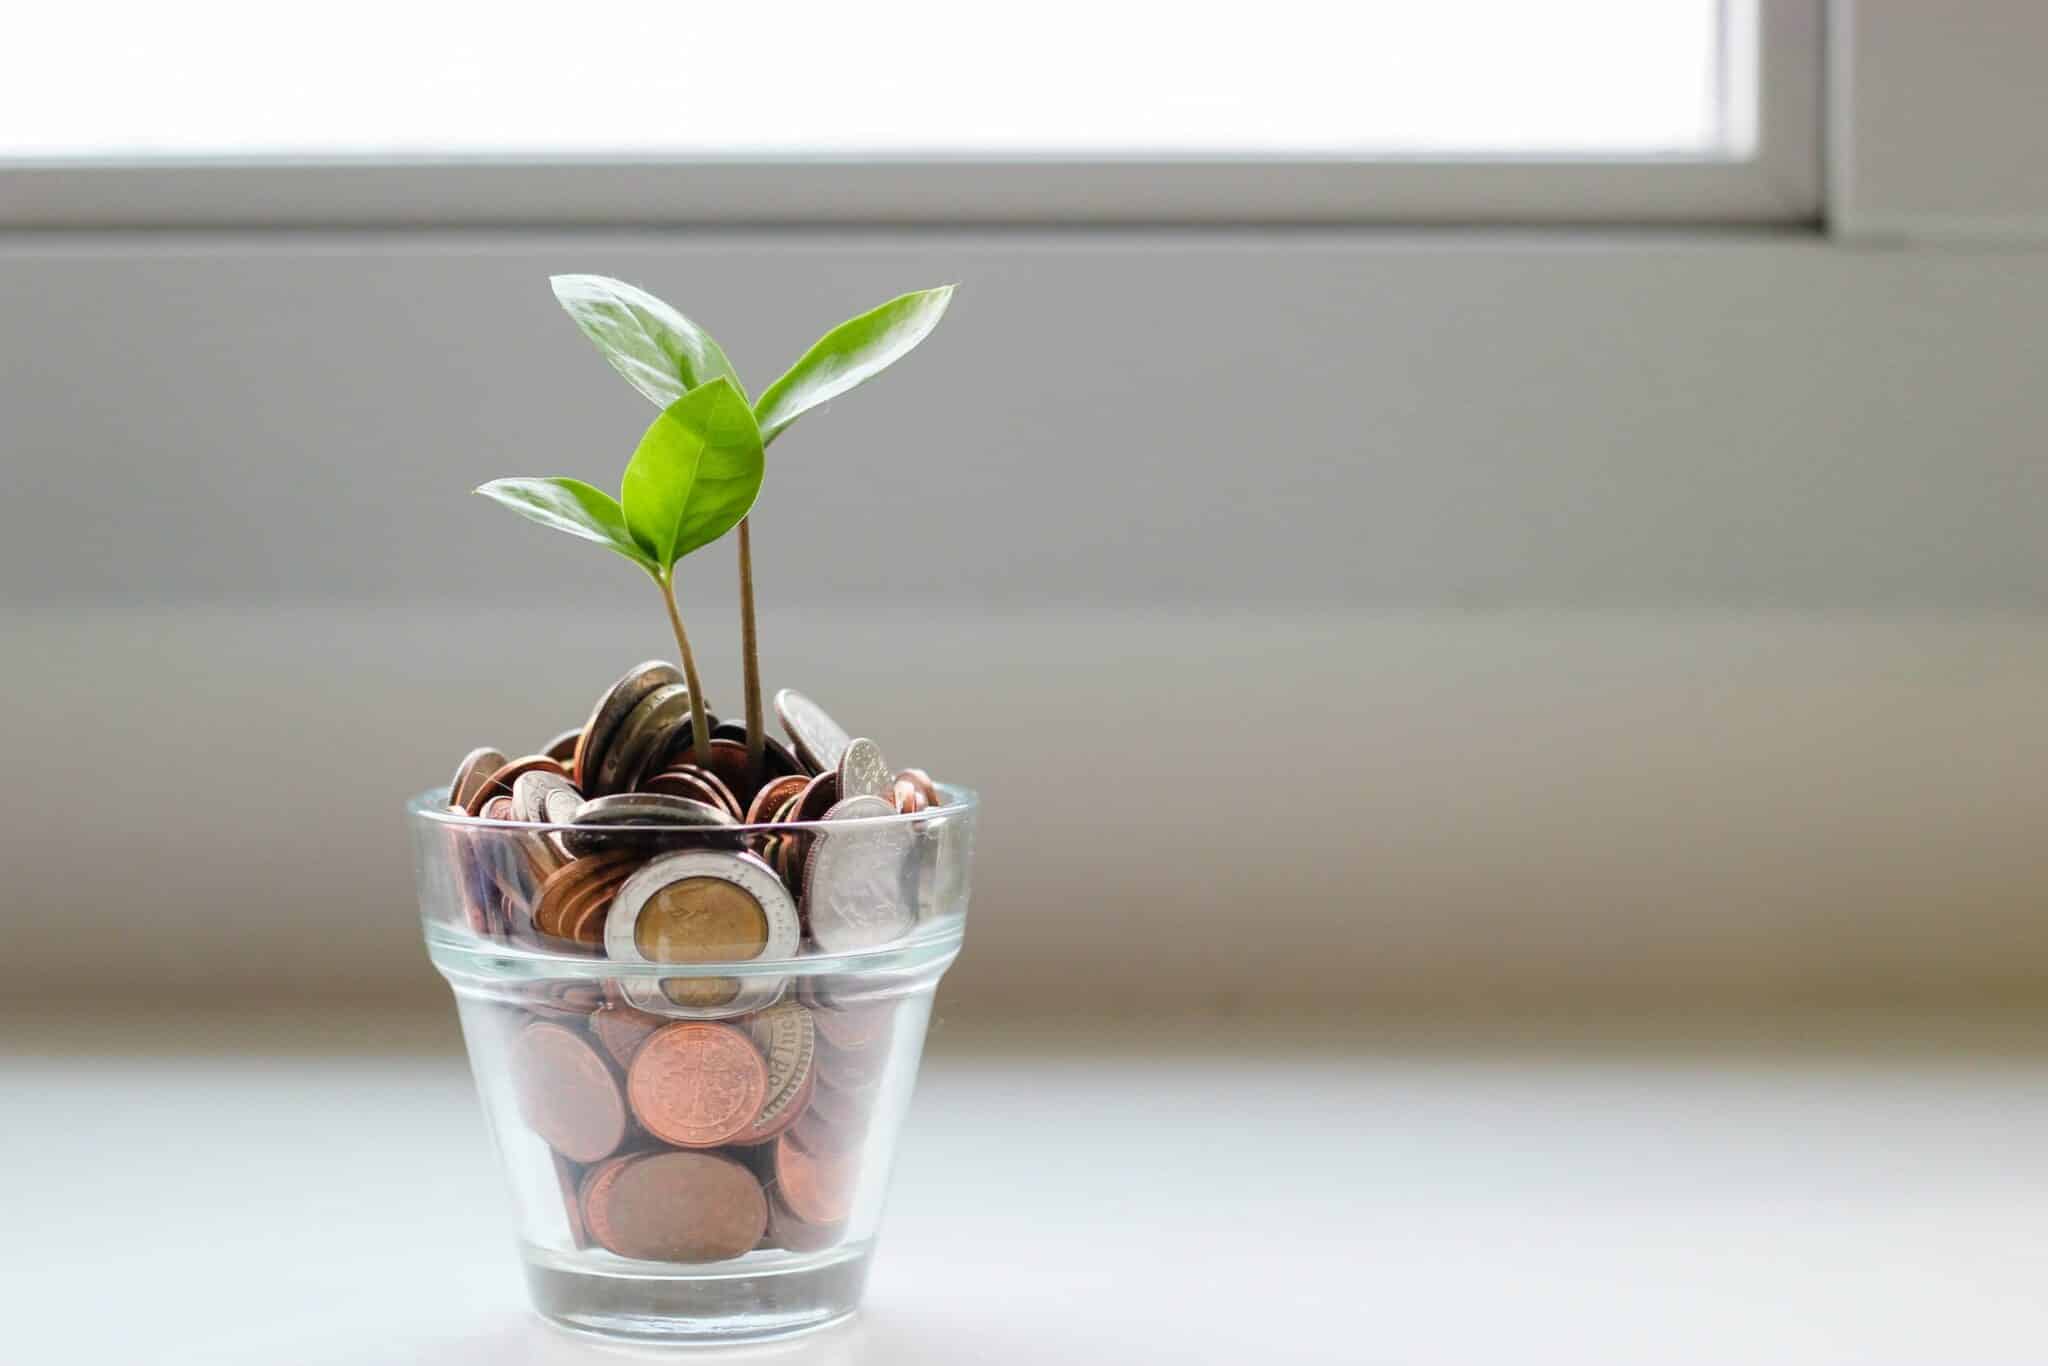 Pot of coins with a plant growing out the top